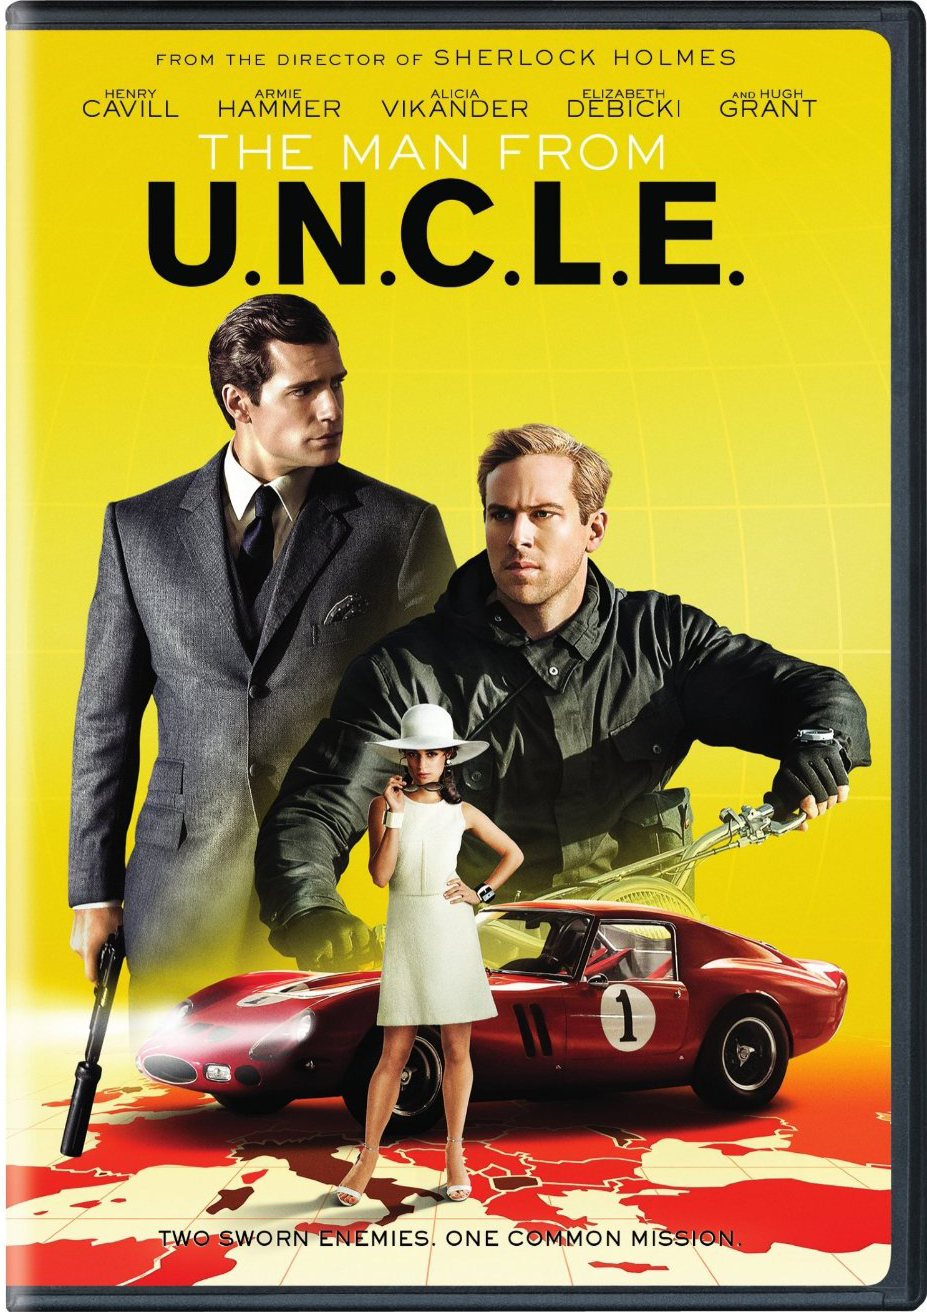 Man From U.N.C.L.E., The